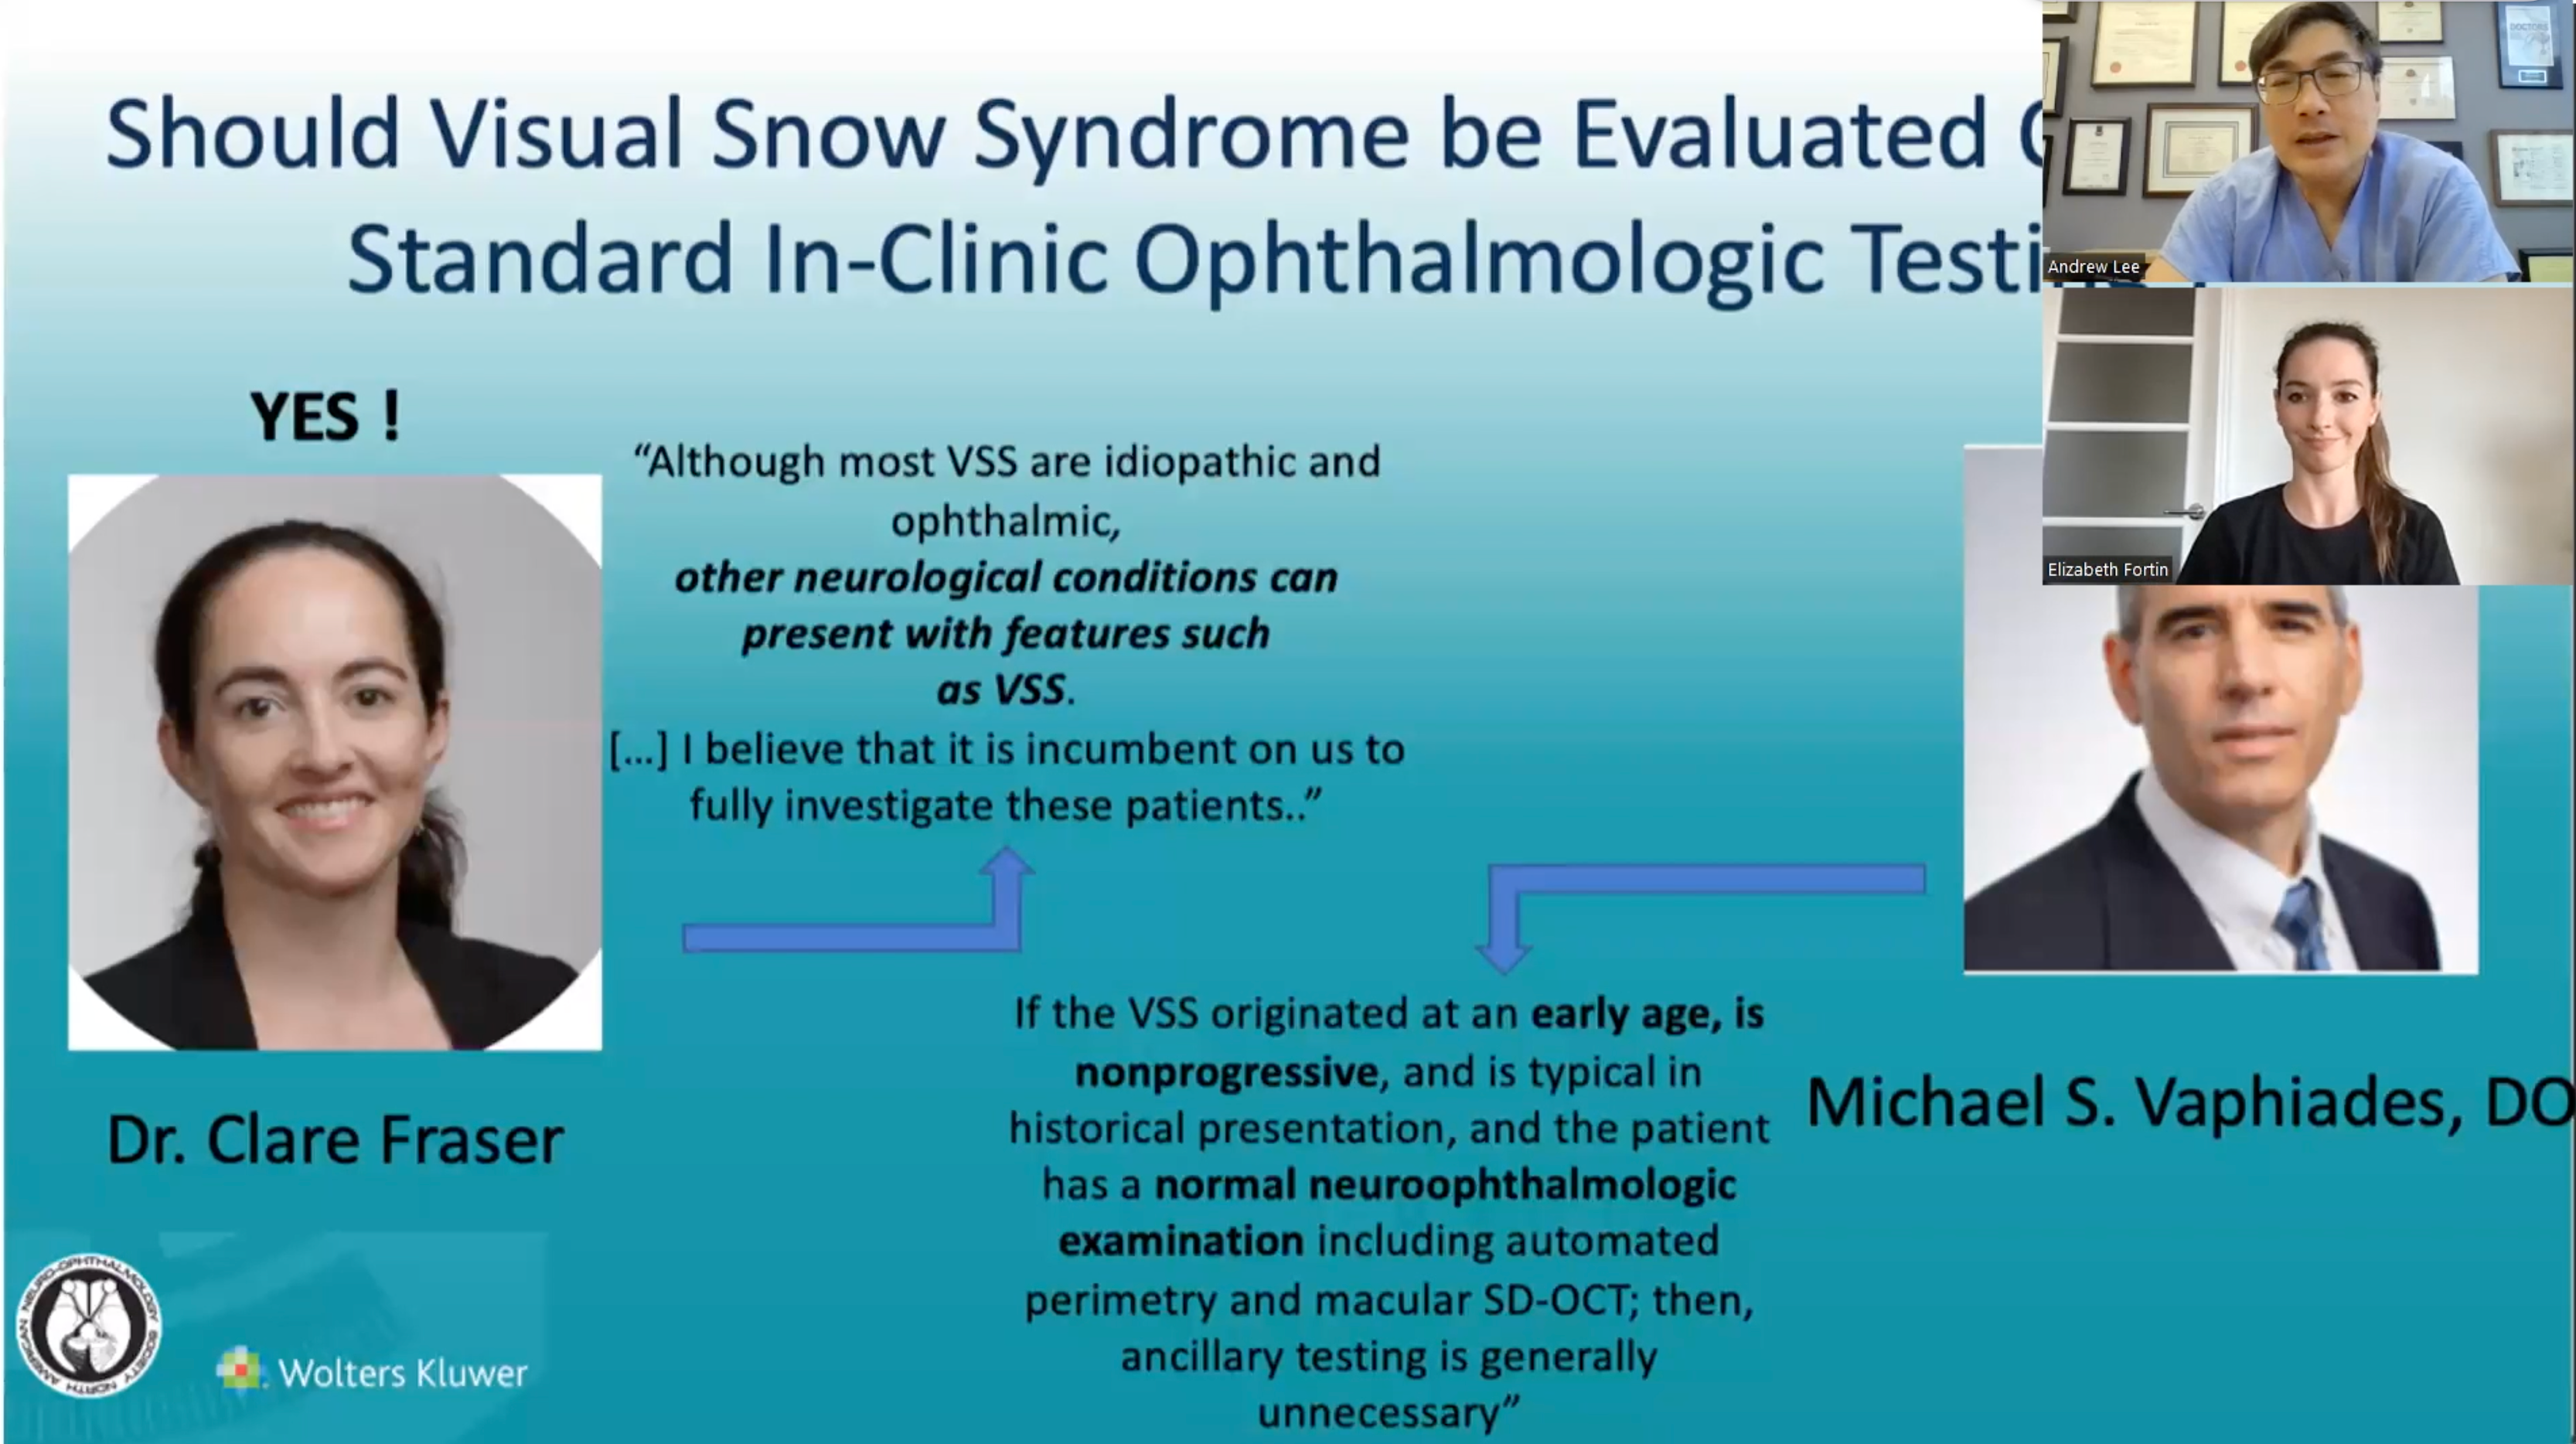 ICYMI: Blog offers pearls about the diagnosis, treatment of visual snow syndrome